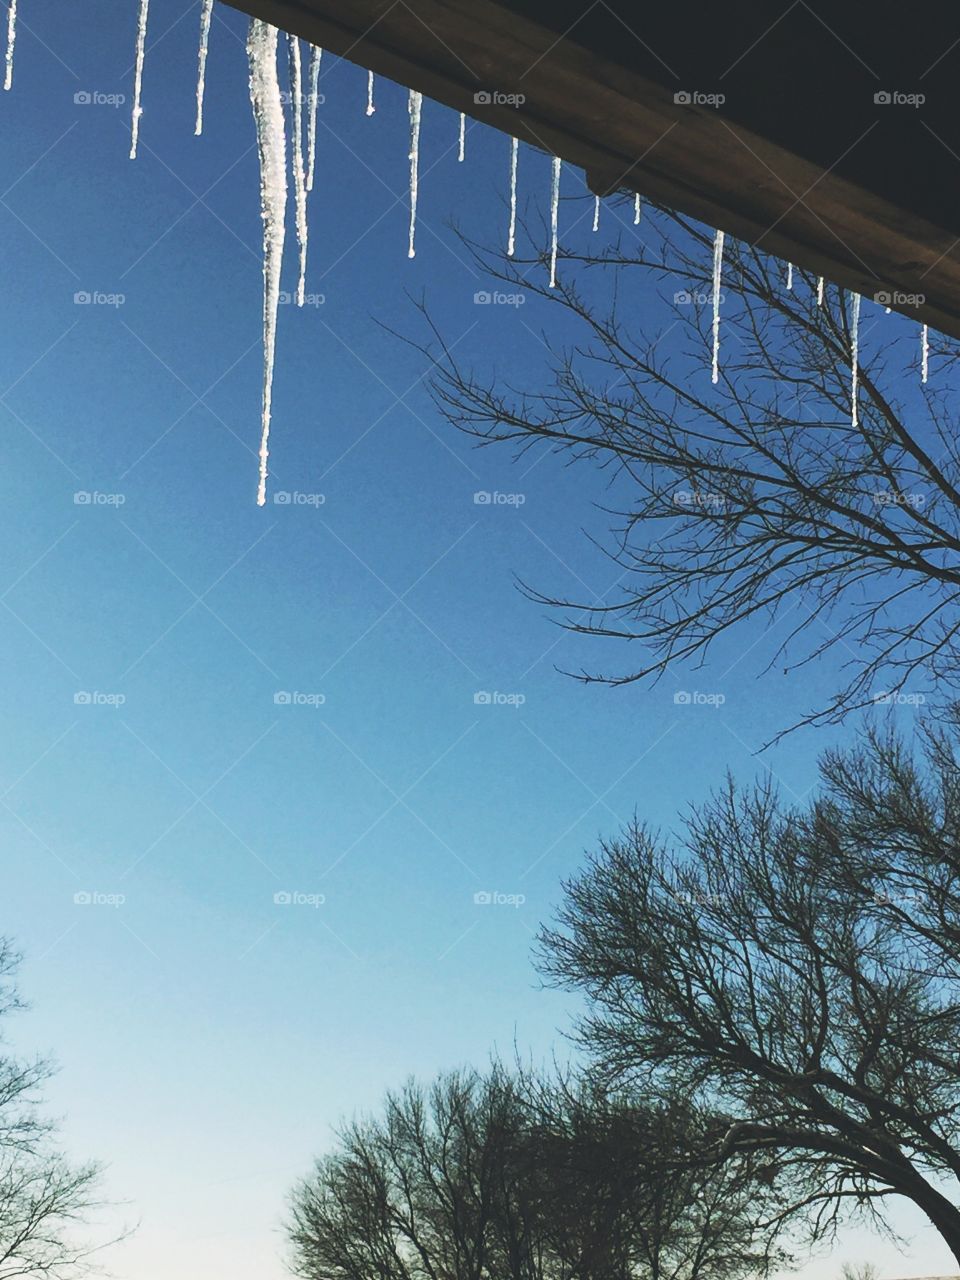 Icicles hanging from a wooden shed overhang and illuminated by winter sunshine against tall, bare trees and clear, blue sky